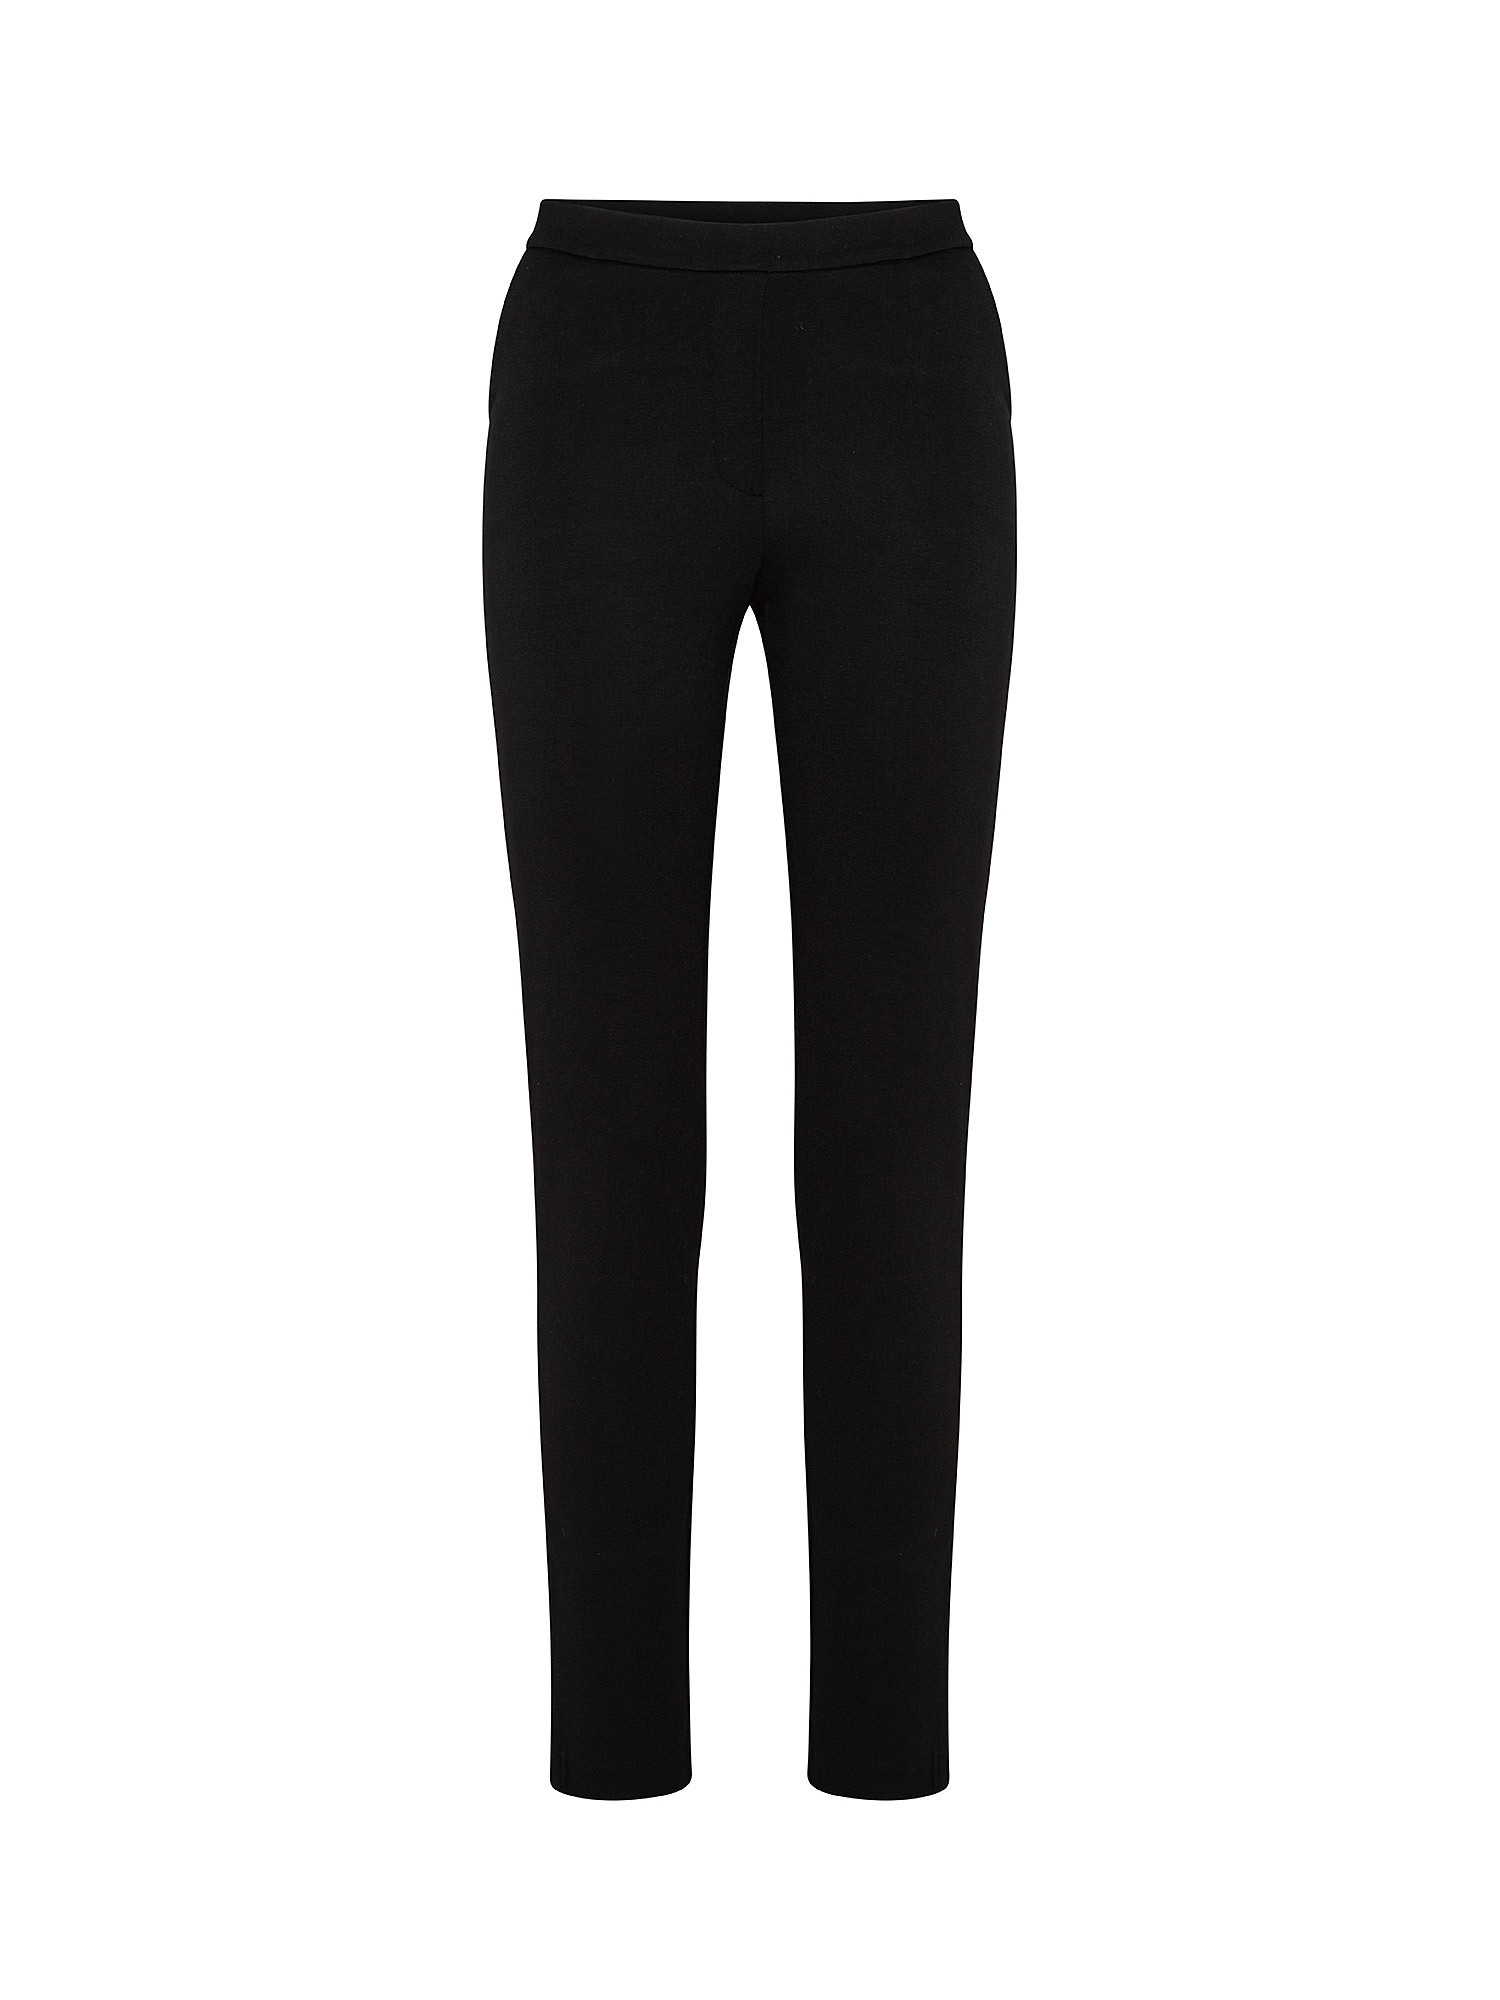 Solid color trousers, Black, large image number 0